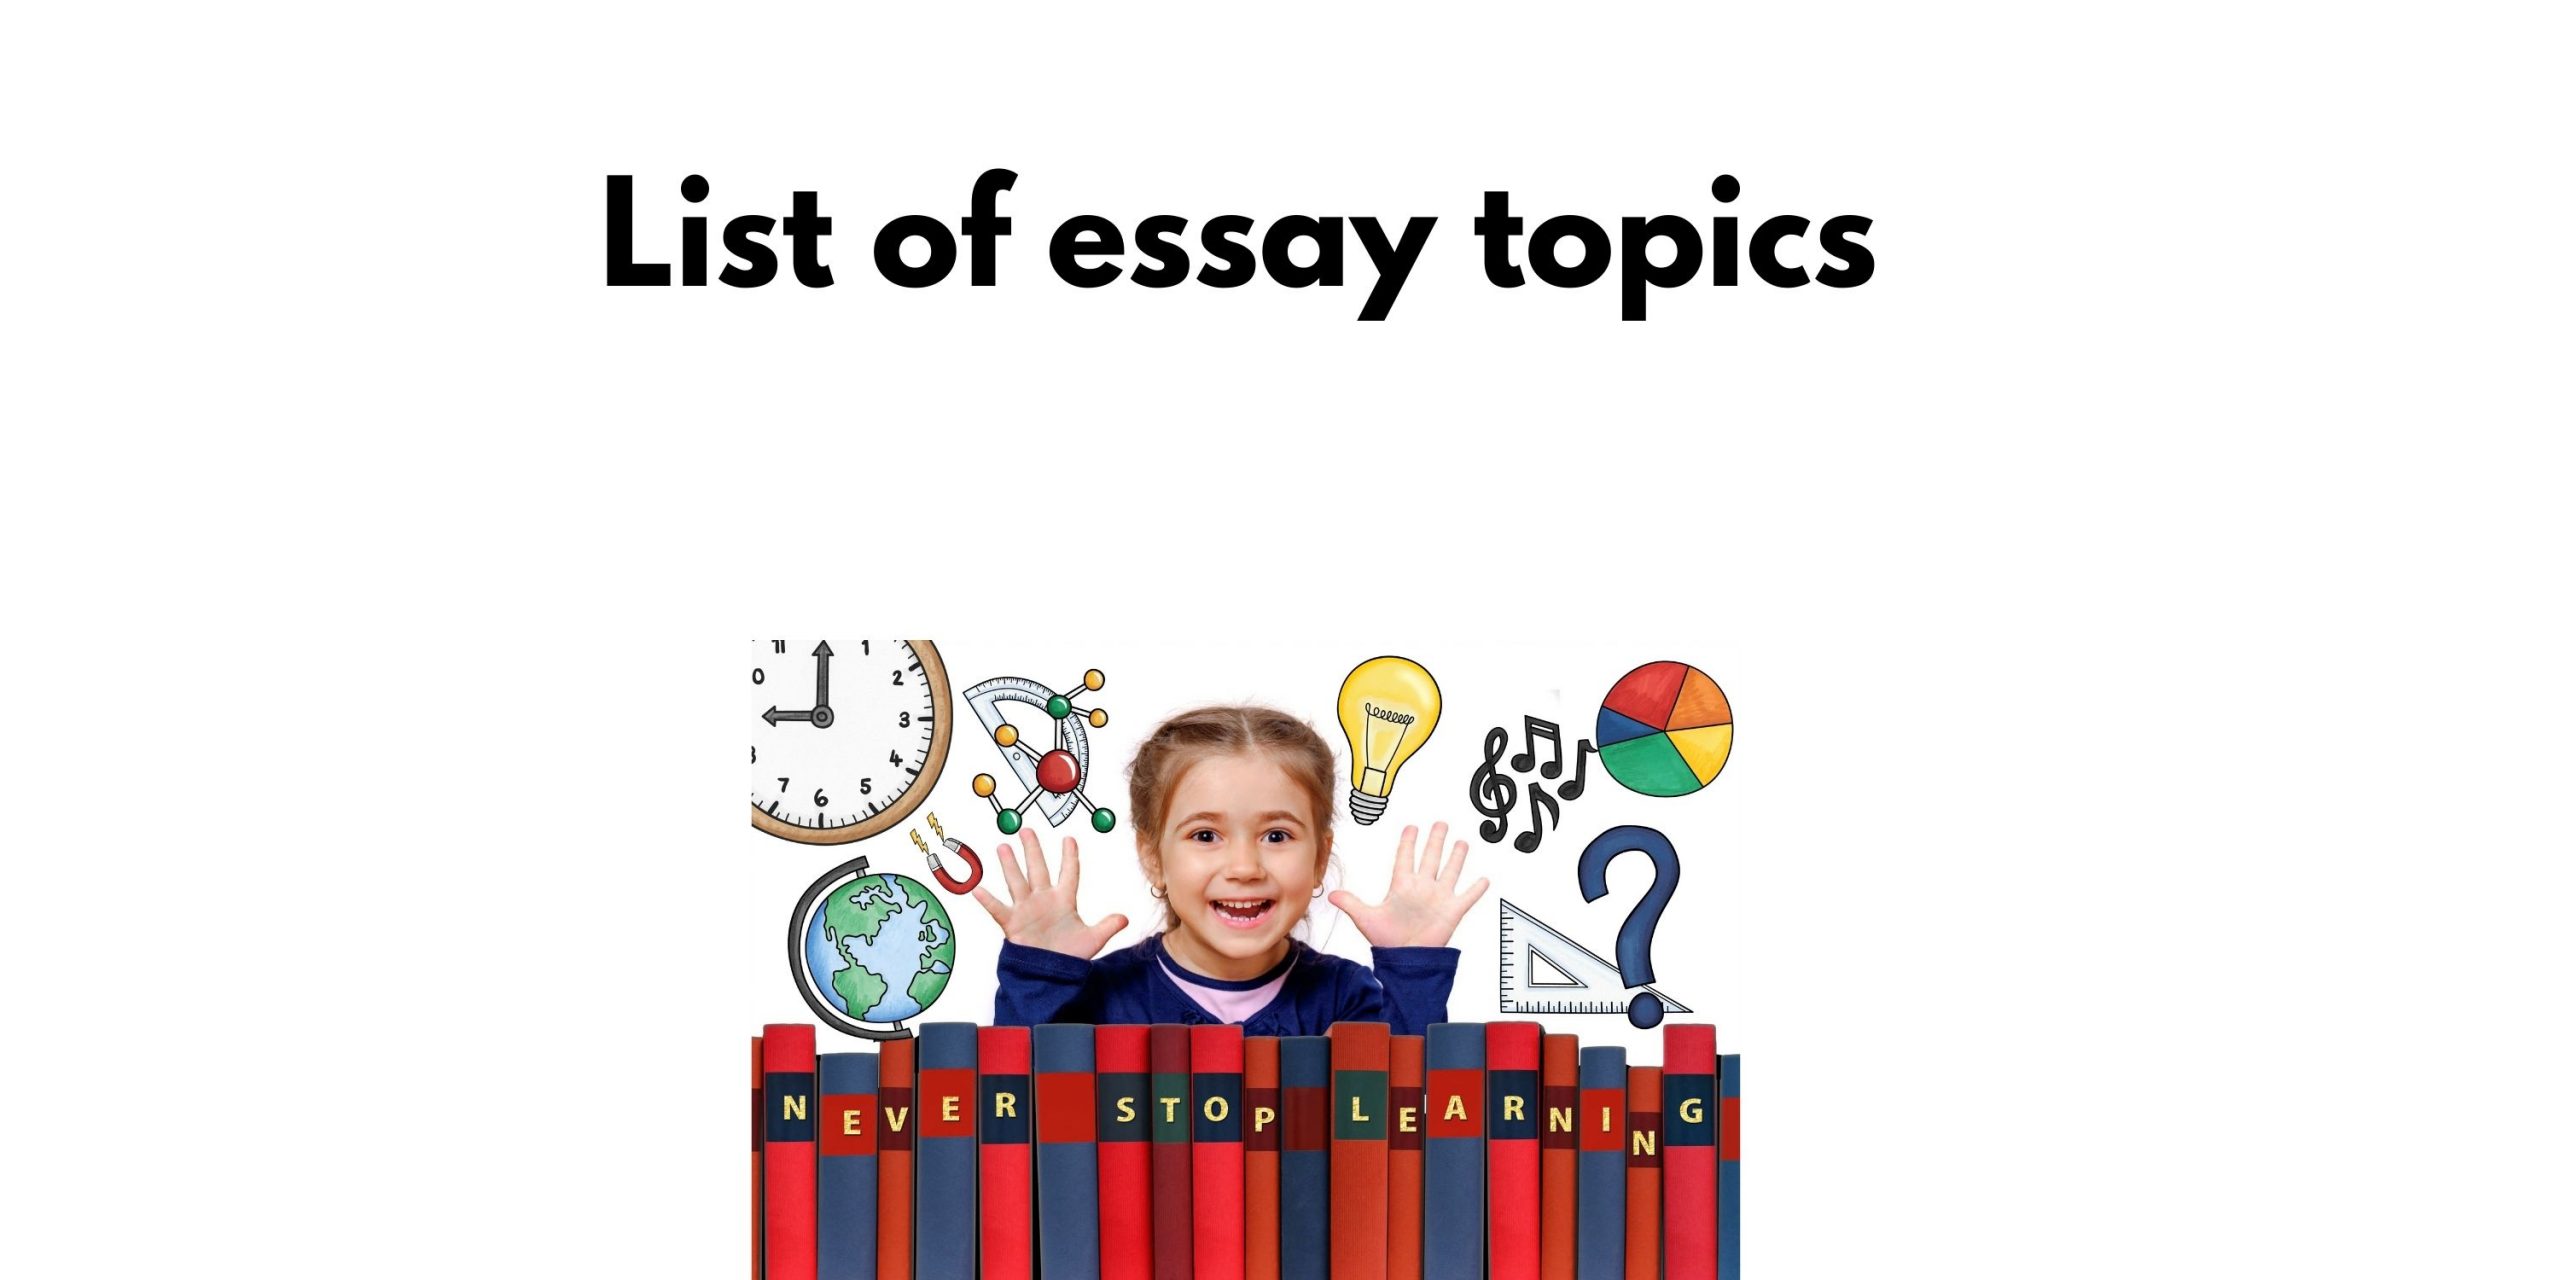 You are currently viewing Essay Topics for students from Class 6th to Class 10th.